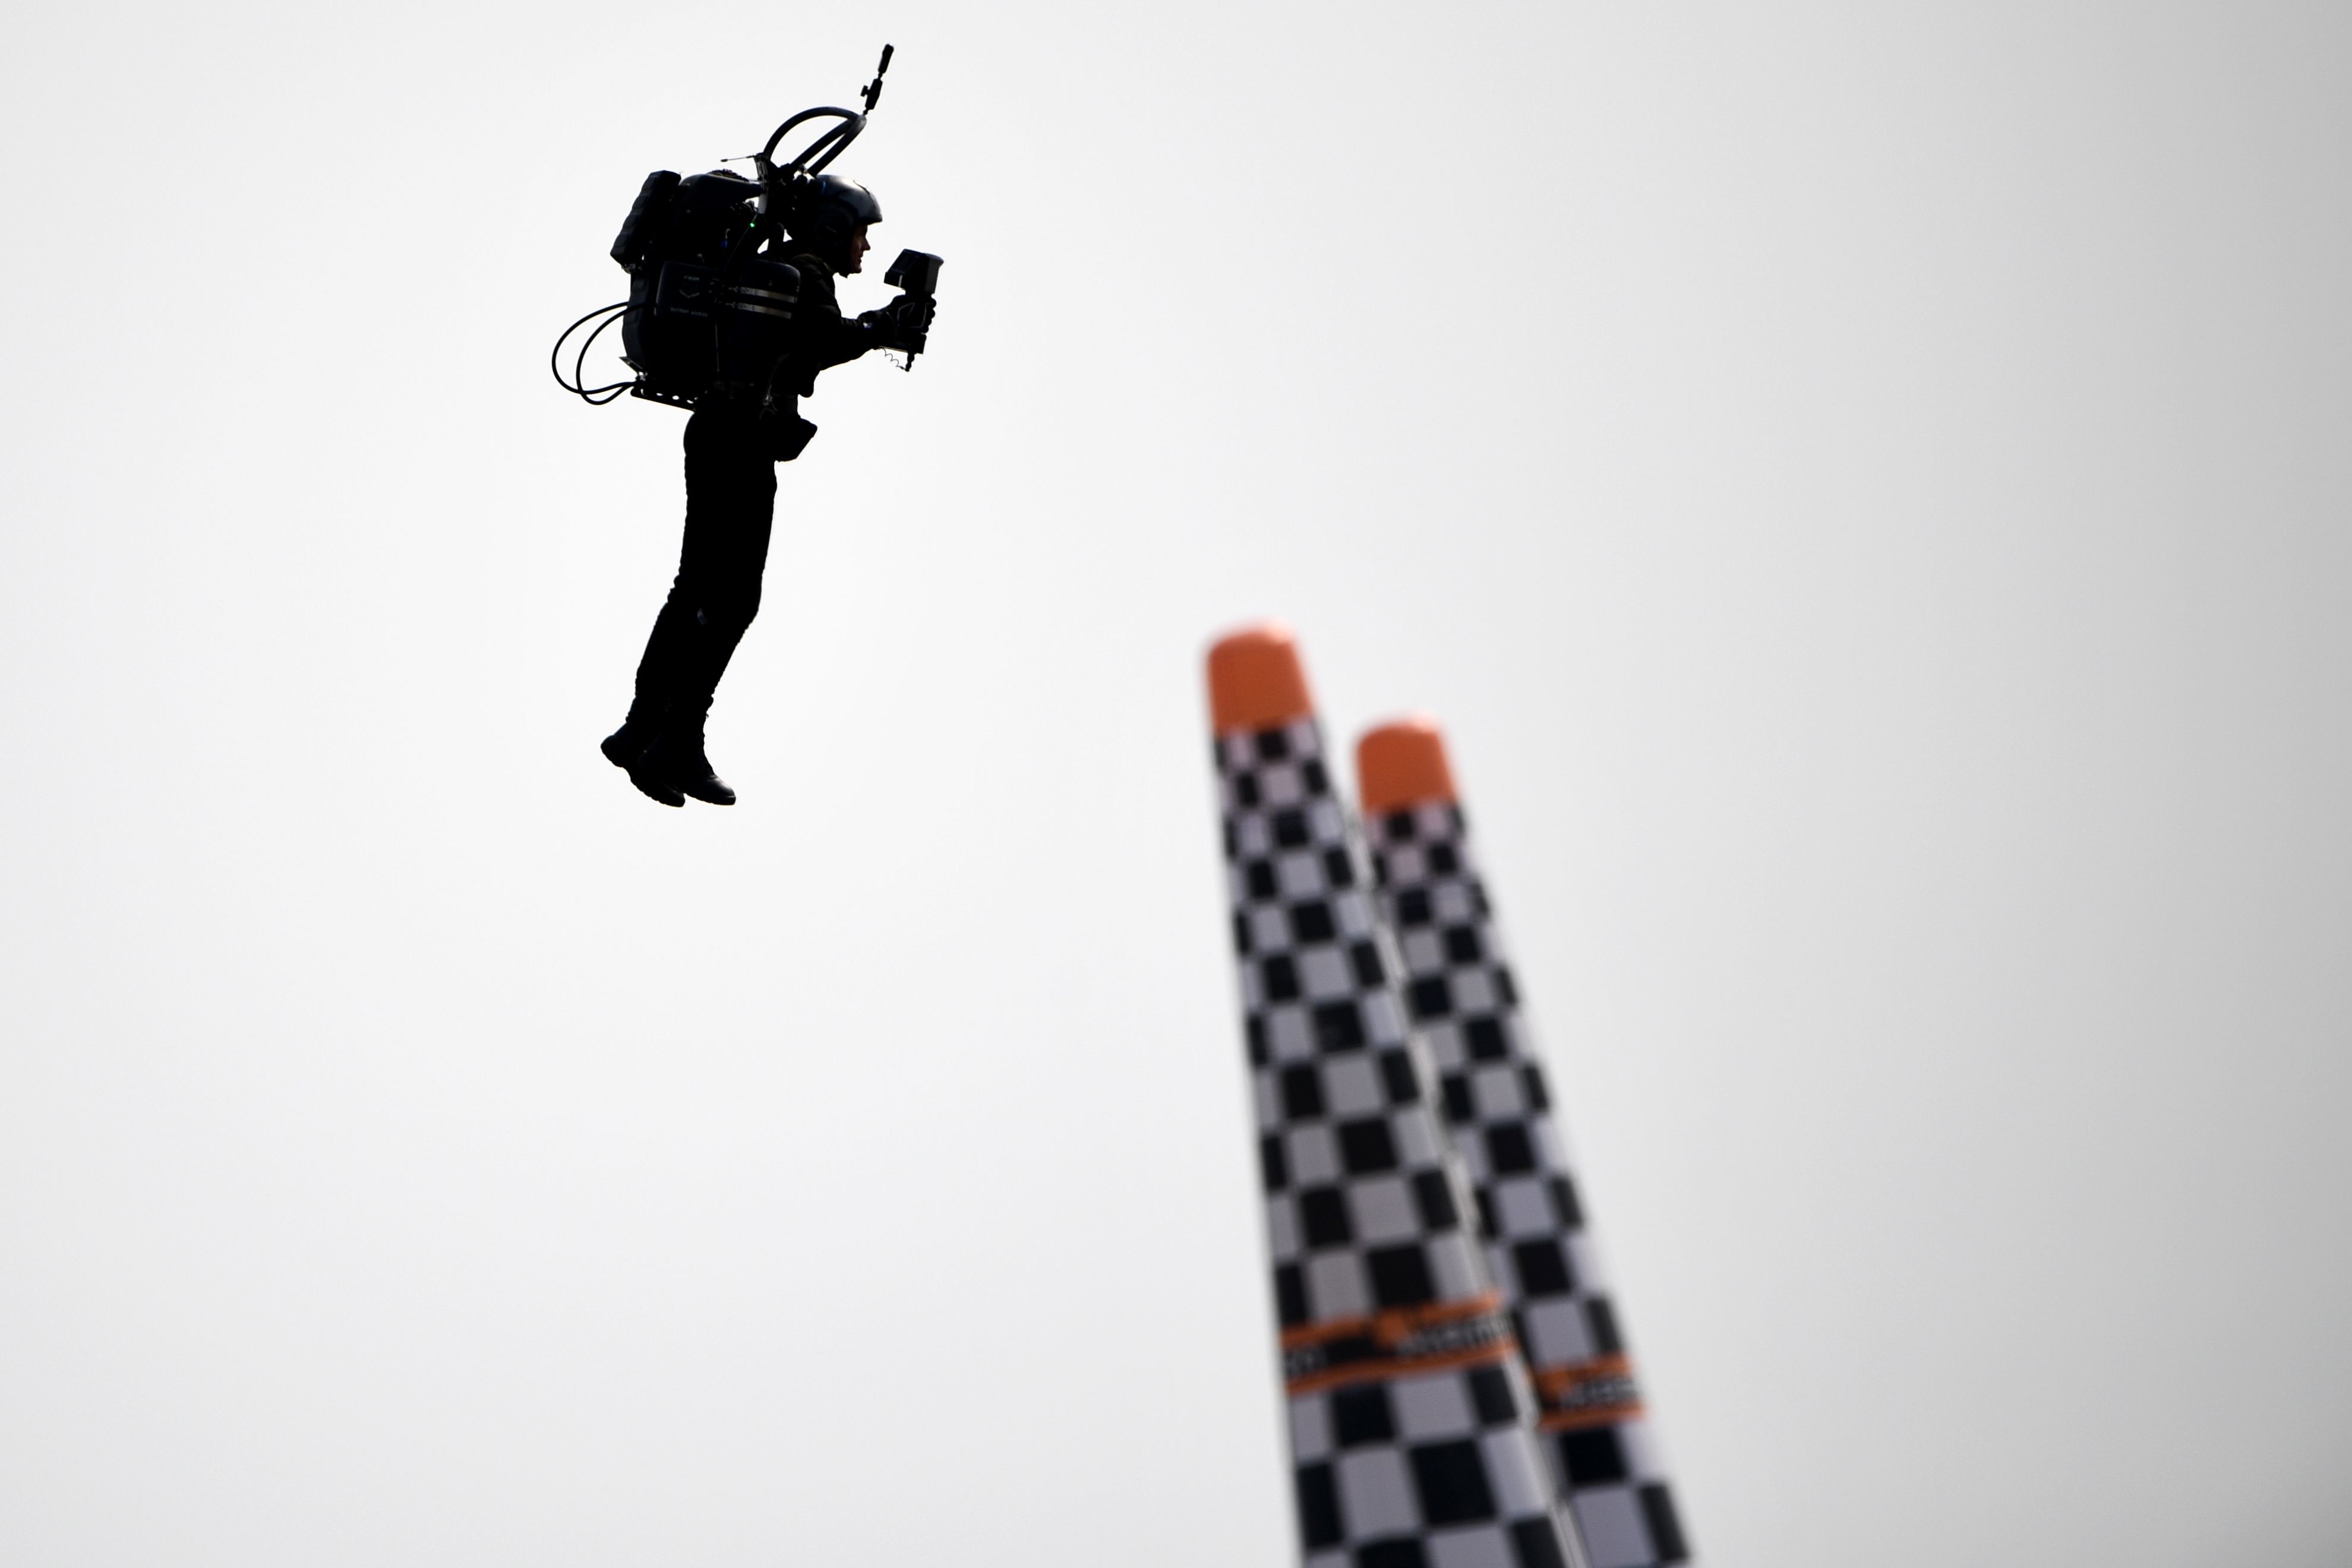 Watch: Jetpack pilot reaches 6,000 feet, breaking altitude record